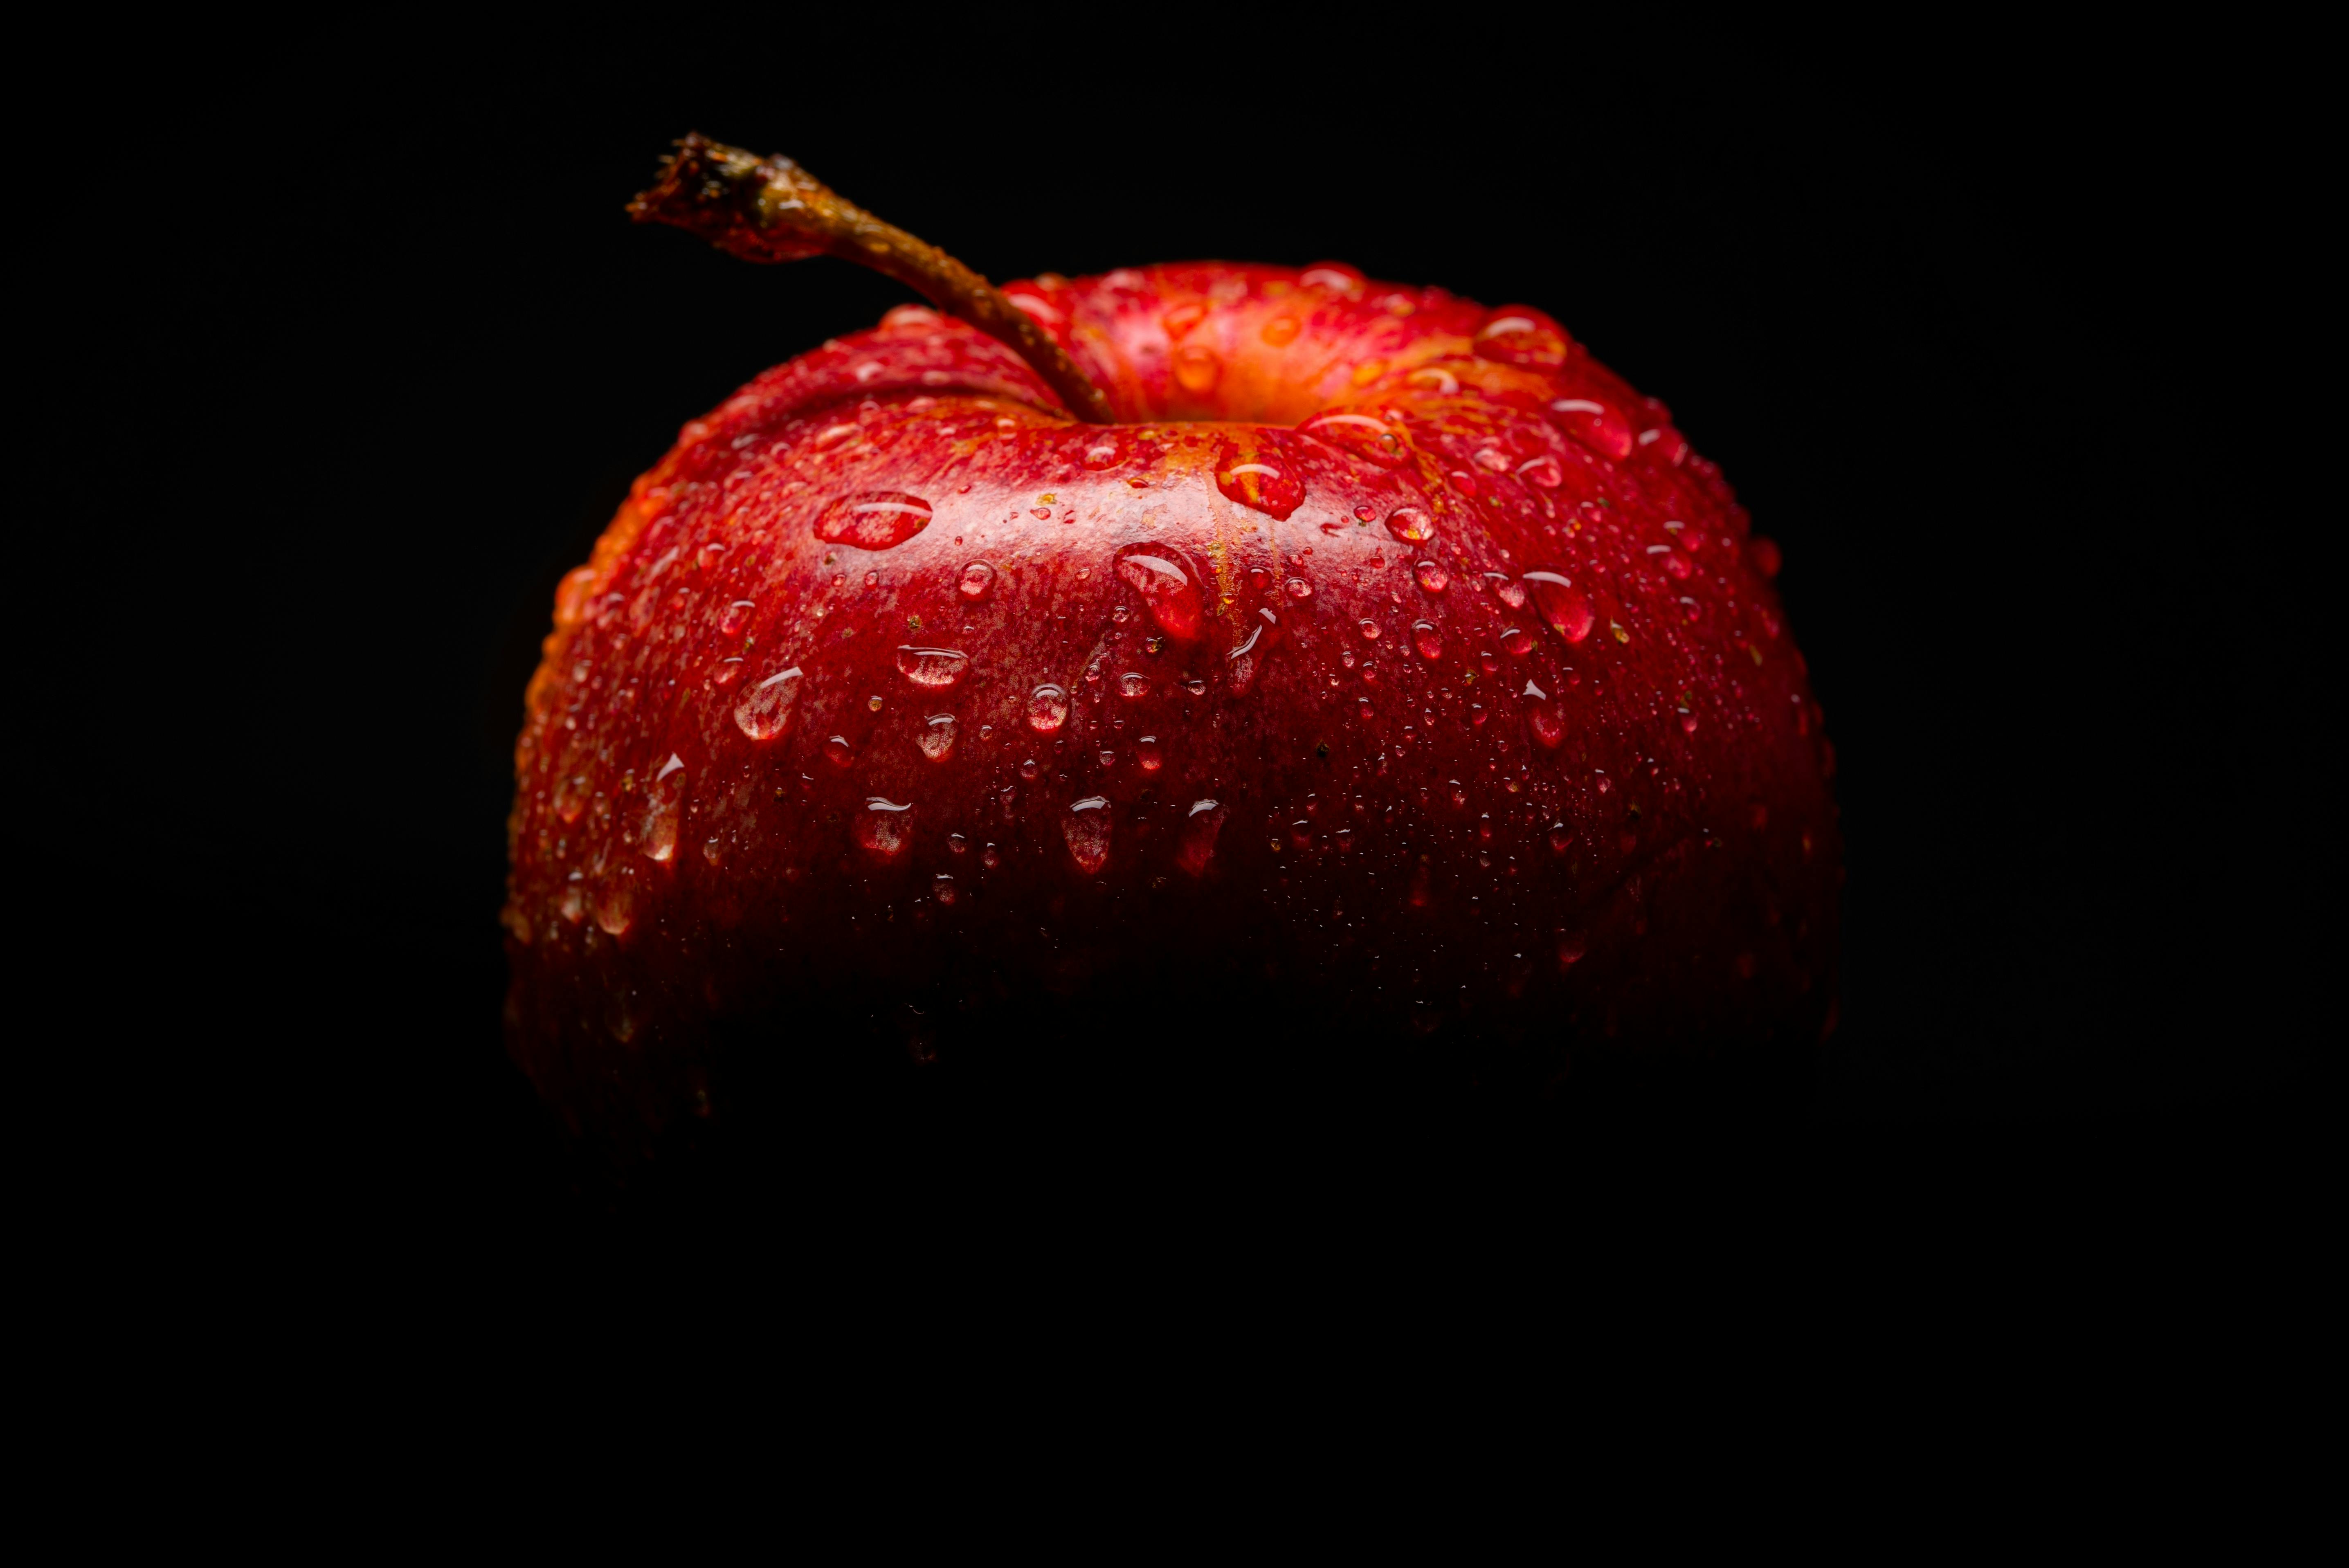 Red Apple Wallpaper 65 pictures